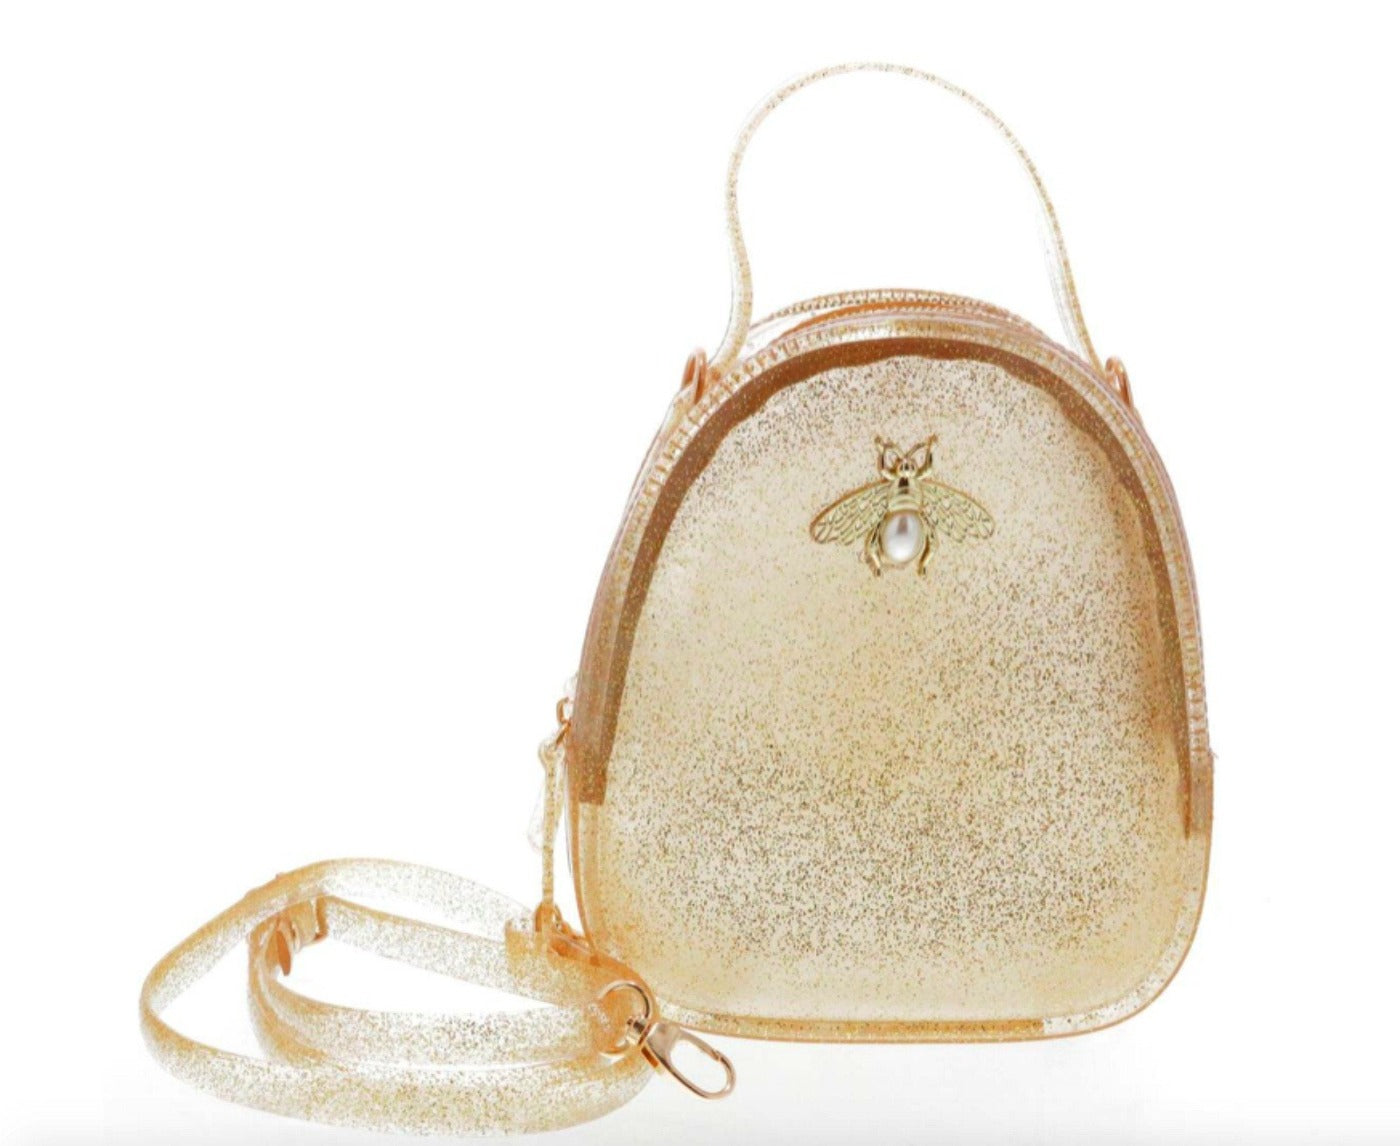 Bags | Buy Womens Bags Online Australia - THE ICONIC